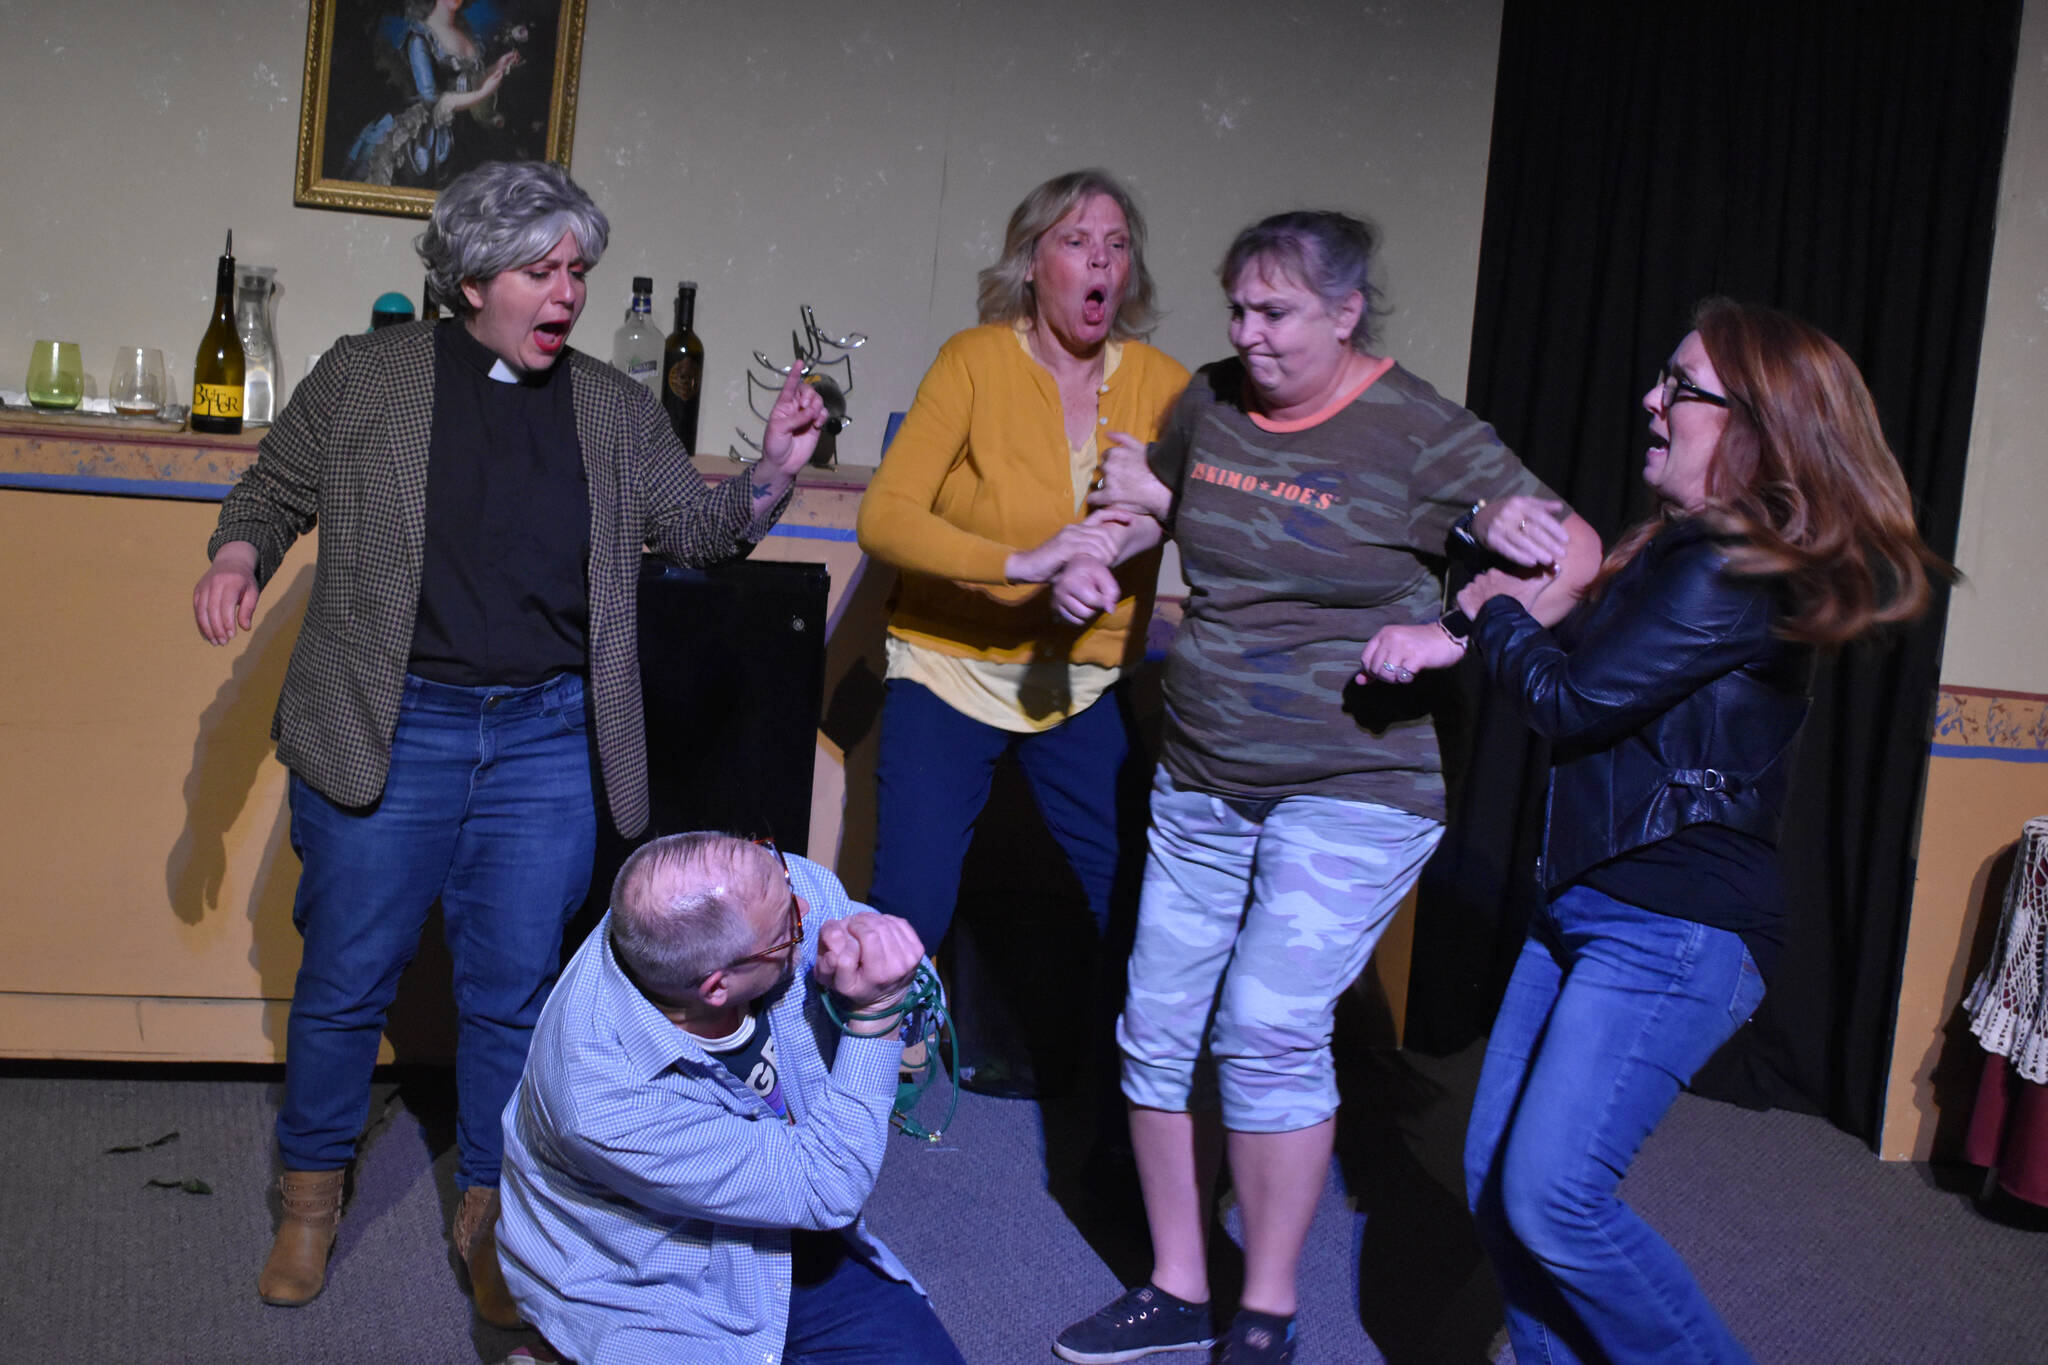 From left: Lacey Jane Brewster, Terri Zopf-Schoessler, Donna Shirnberg, Tracie Sanborn and Bill Taylor (center) rehearse “Menopause Made Me Do It” on Tuesday, Sept. 13, 2022, in Soldotna, Alaska. (Jake Dye/Peninsula Clarion)